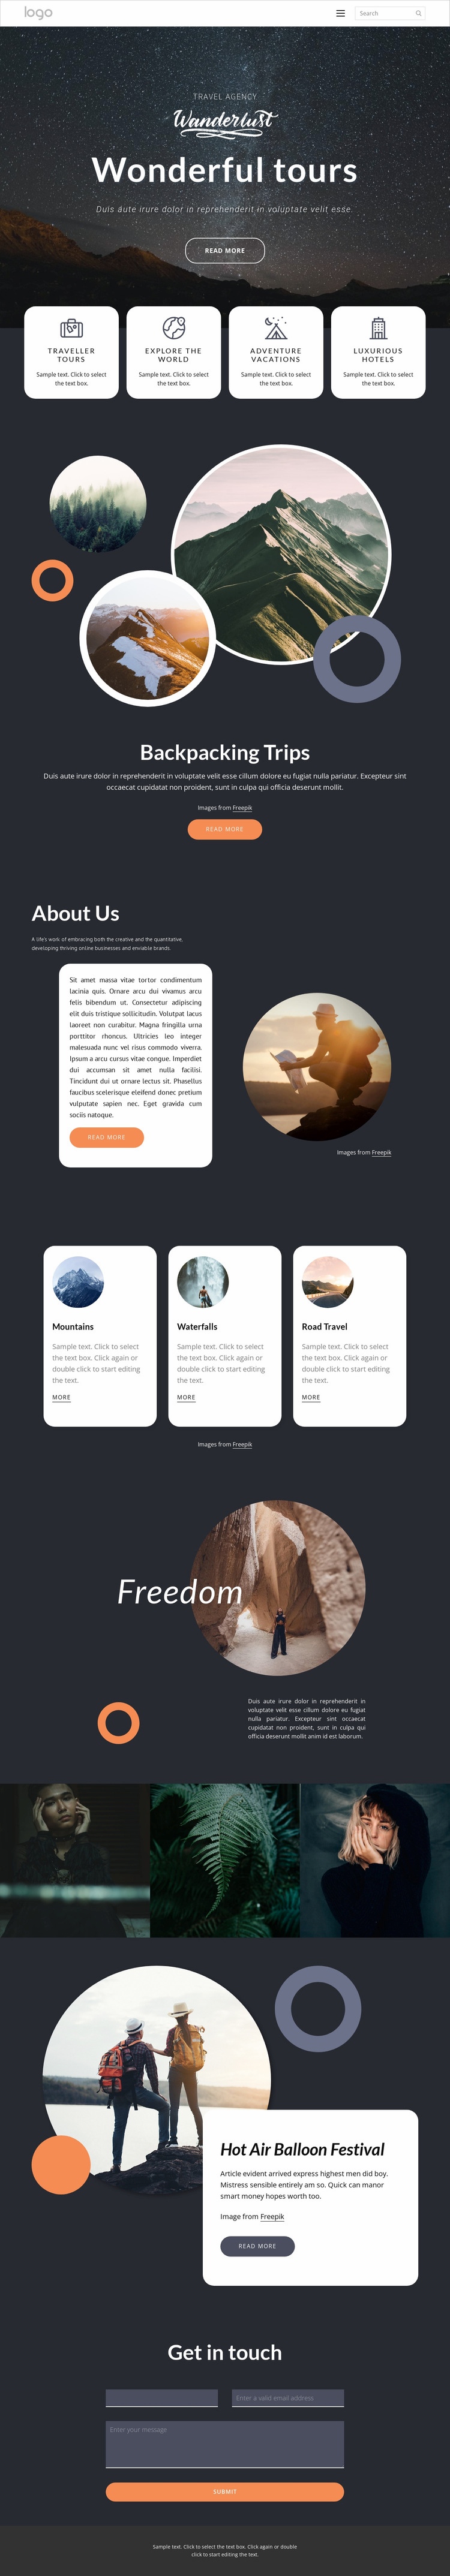 Wonderful travel and tours Wix Template Alternative